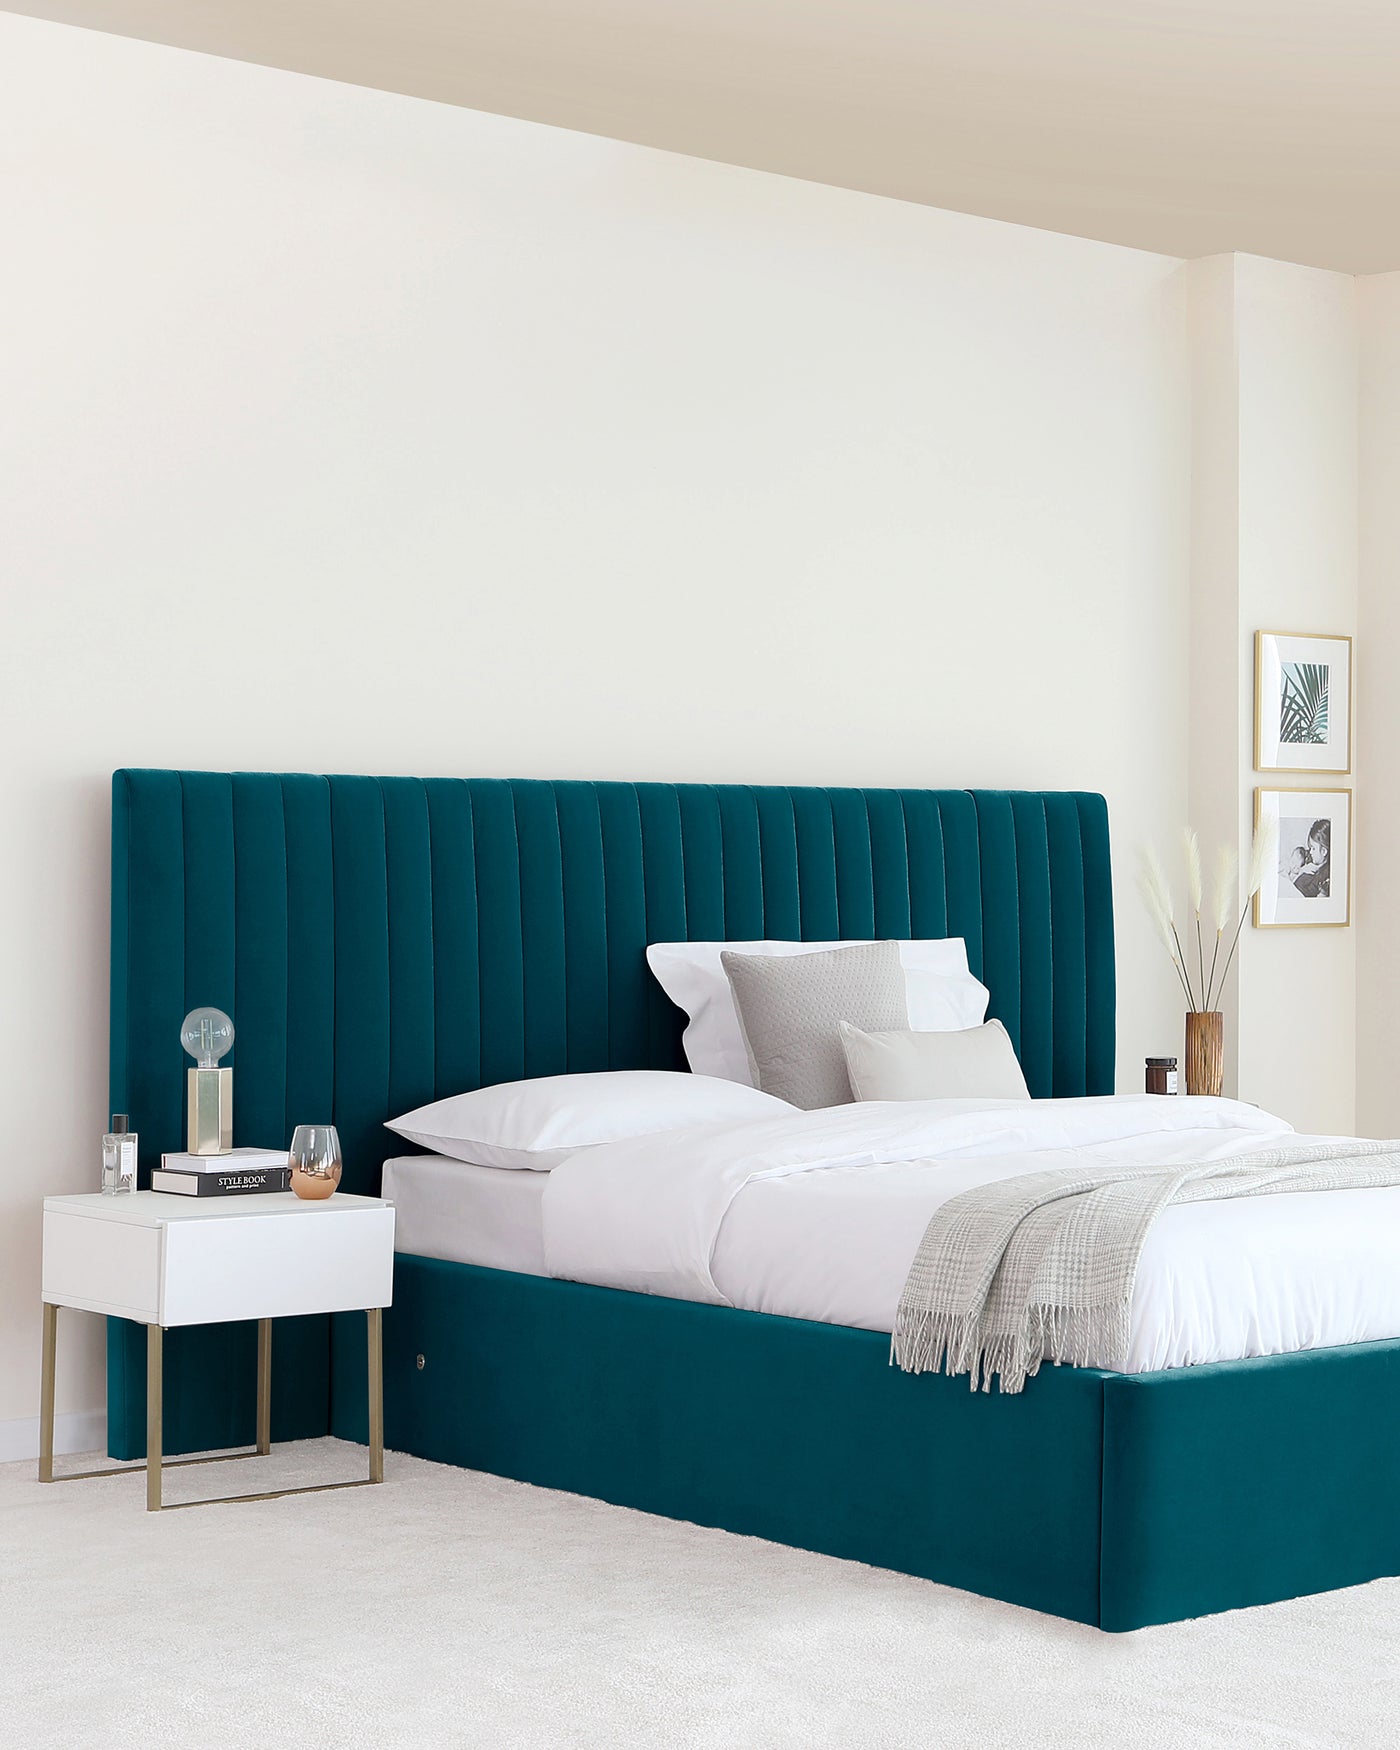 Elegant teal upholstered bed with a tall, vertical channel-tufted headboard, paired with a sleek, white modern nightstand featuring gold metal legs.